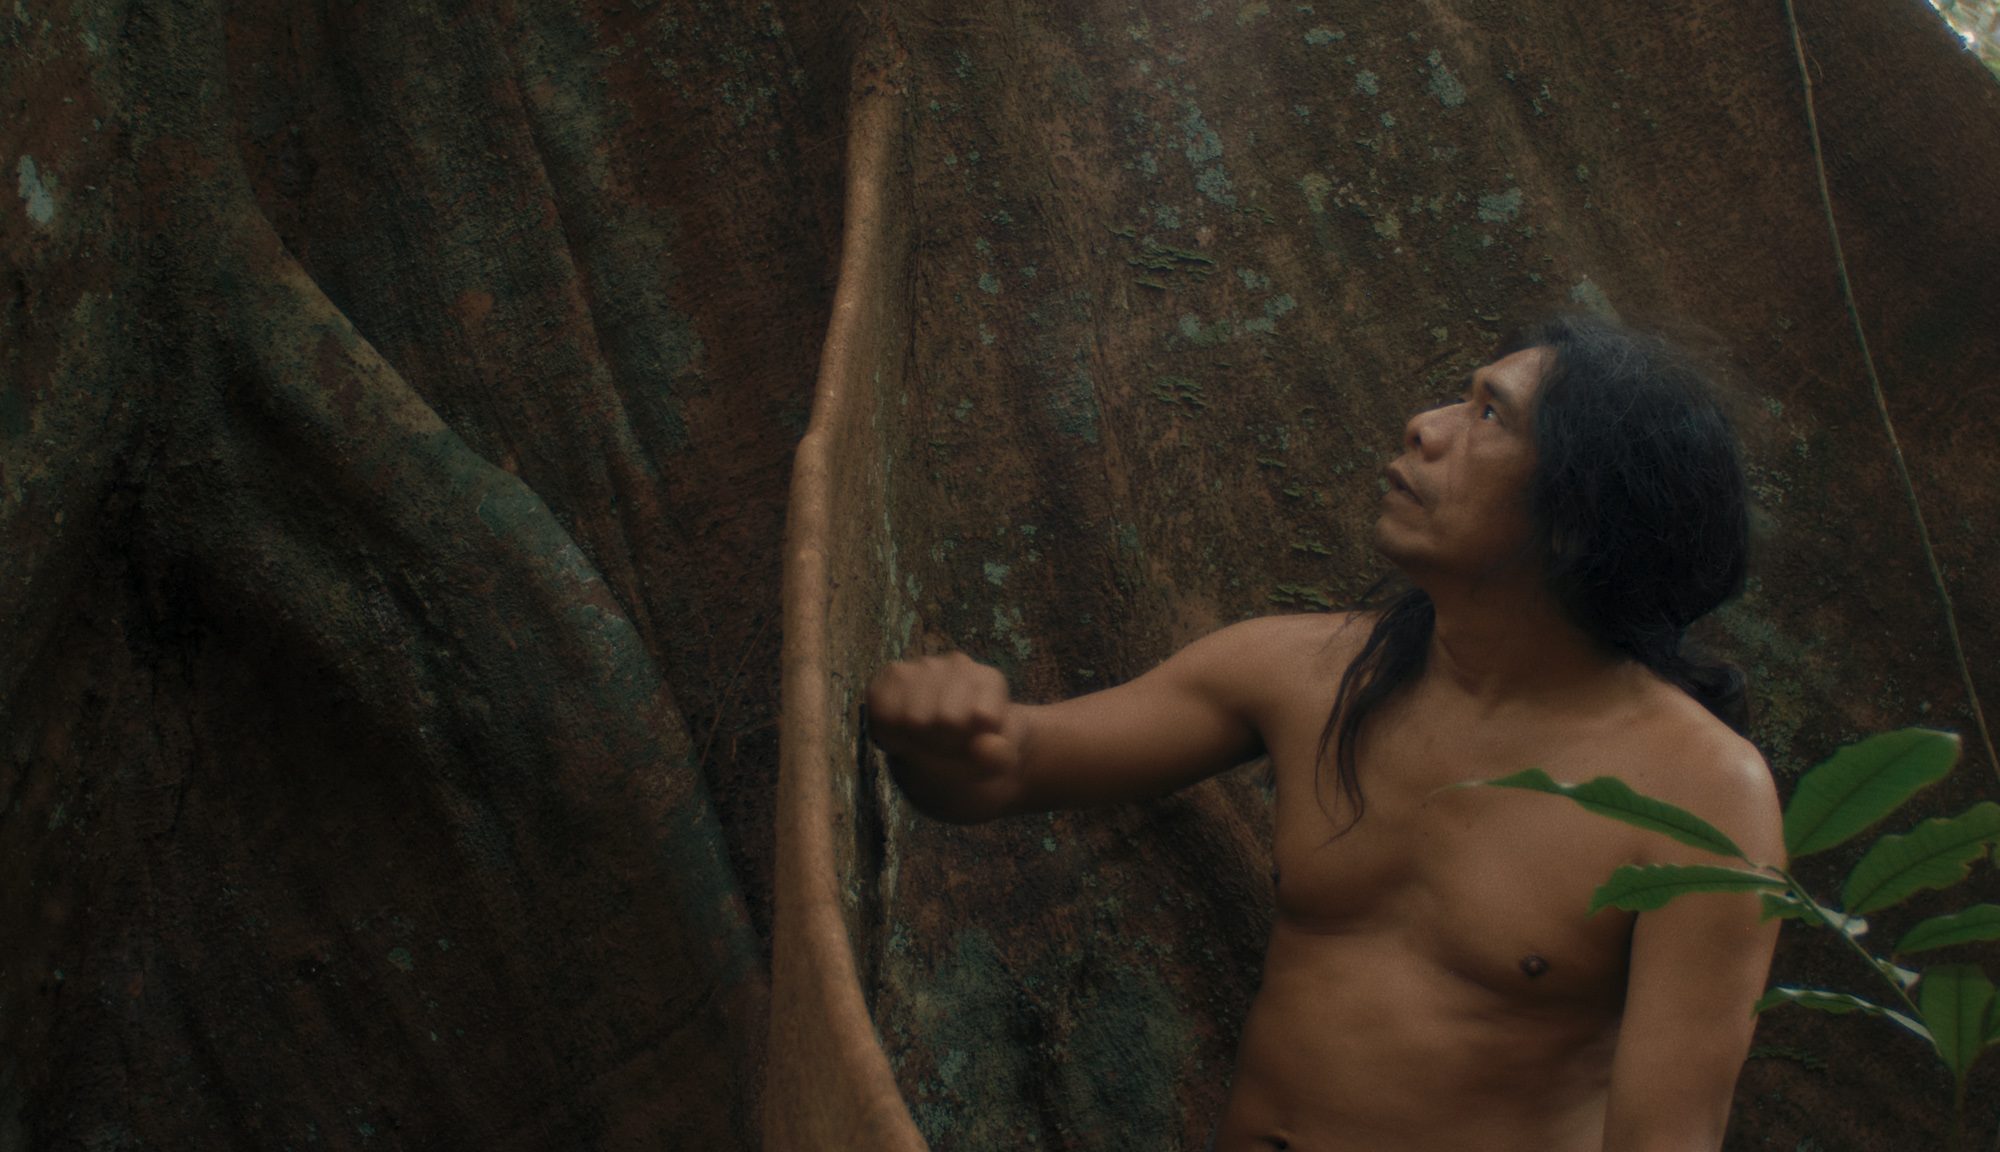 A still from episode 8 of Leviathan, shows an South American indigenous man, pounding a tree with his fist, looking up at it.